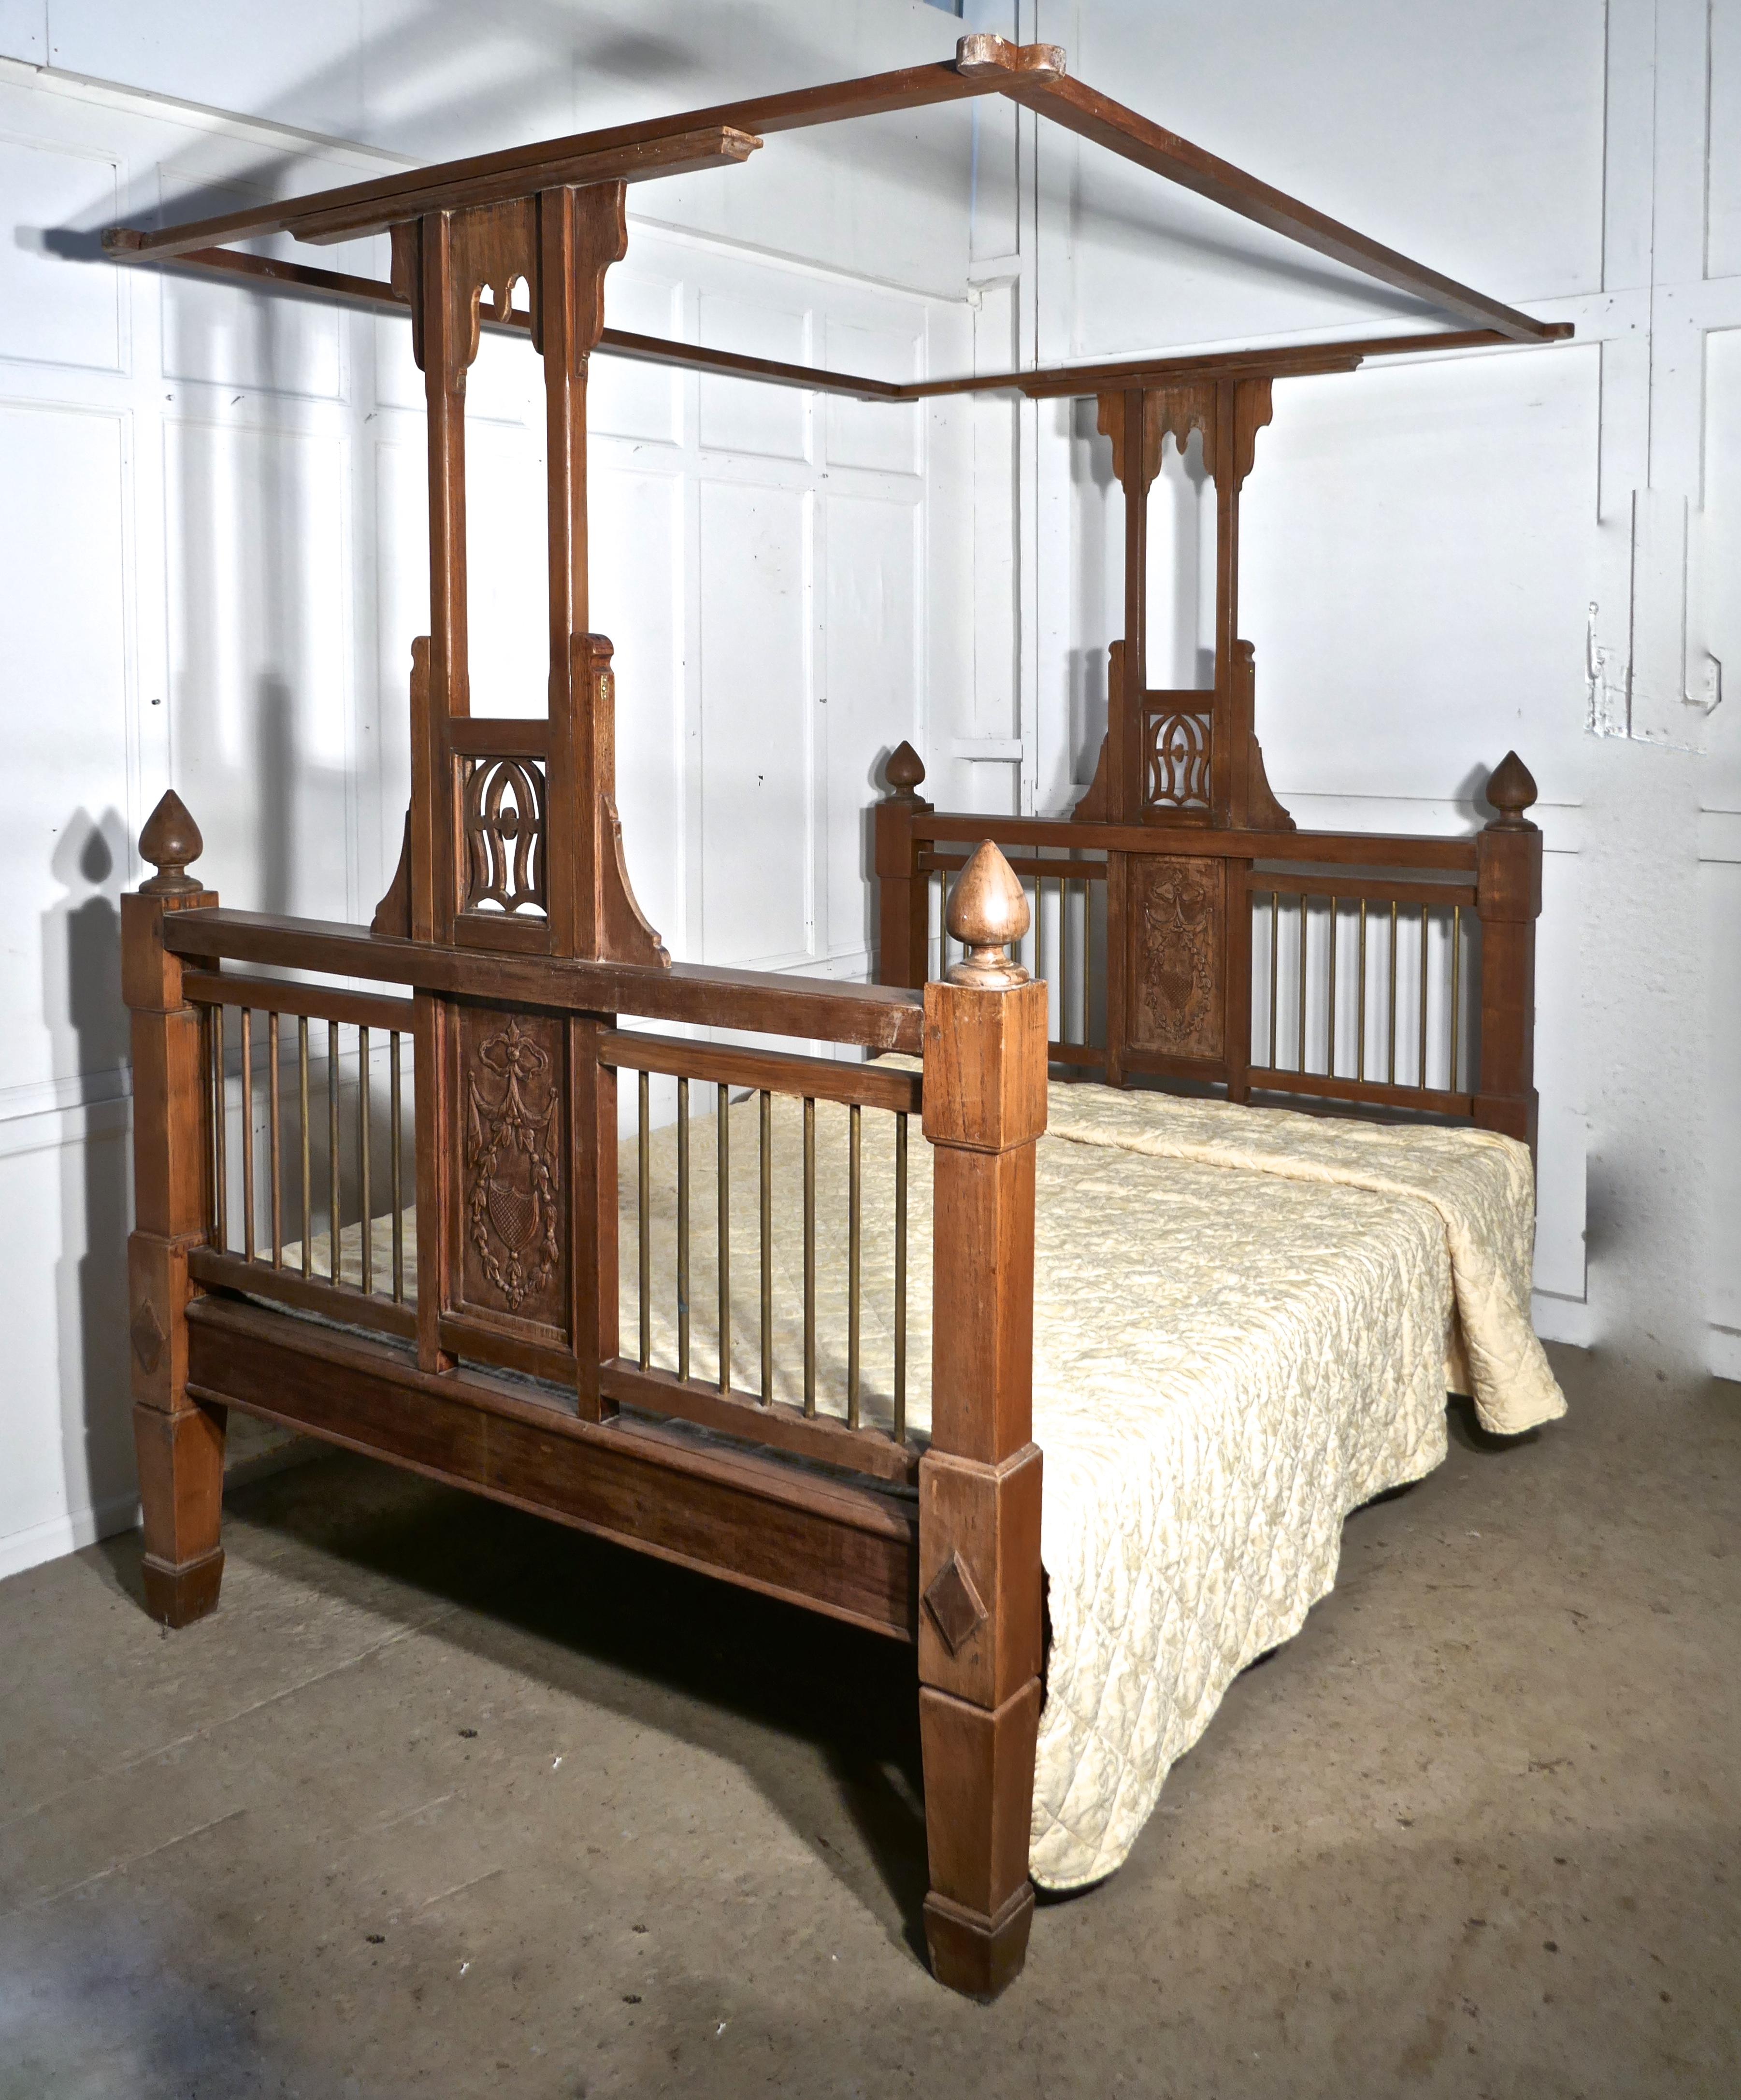 Anglo Indian Antique 4 Poster 5ft Double Bed

This is a very unusual bed it has slightly square lines with a pierced and carved central post leading up from the centre supporting the wide over bed canopy
The bed head and foot have chunky brass rails